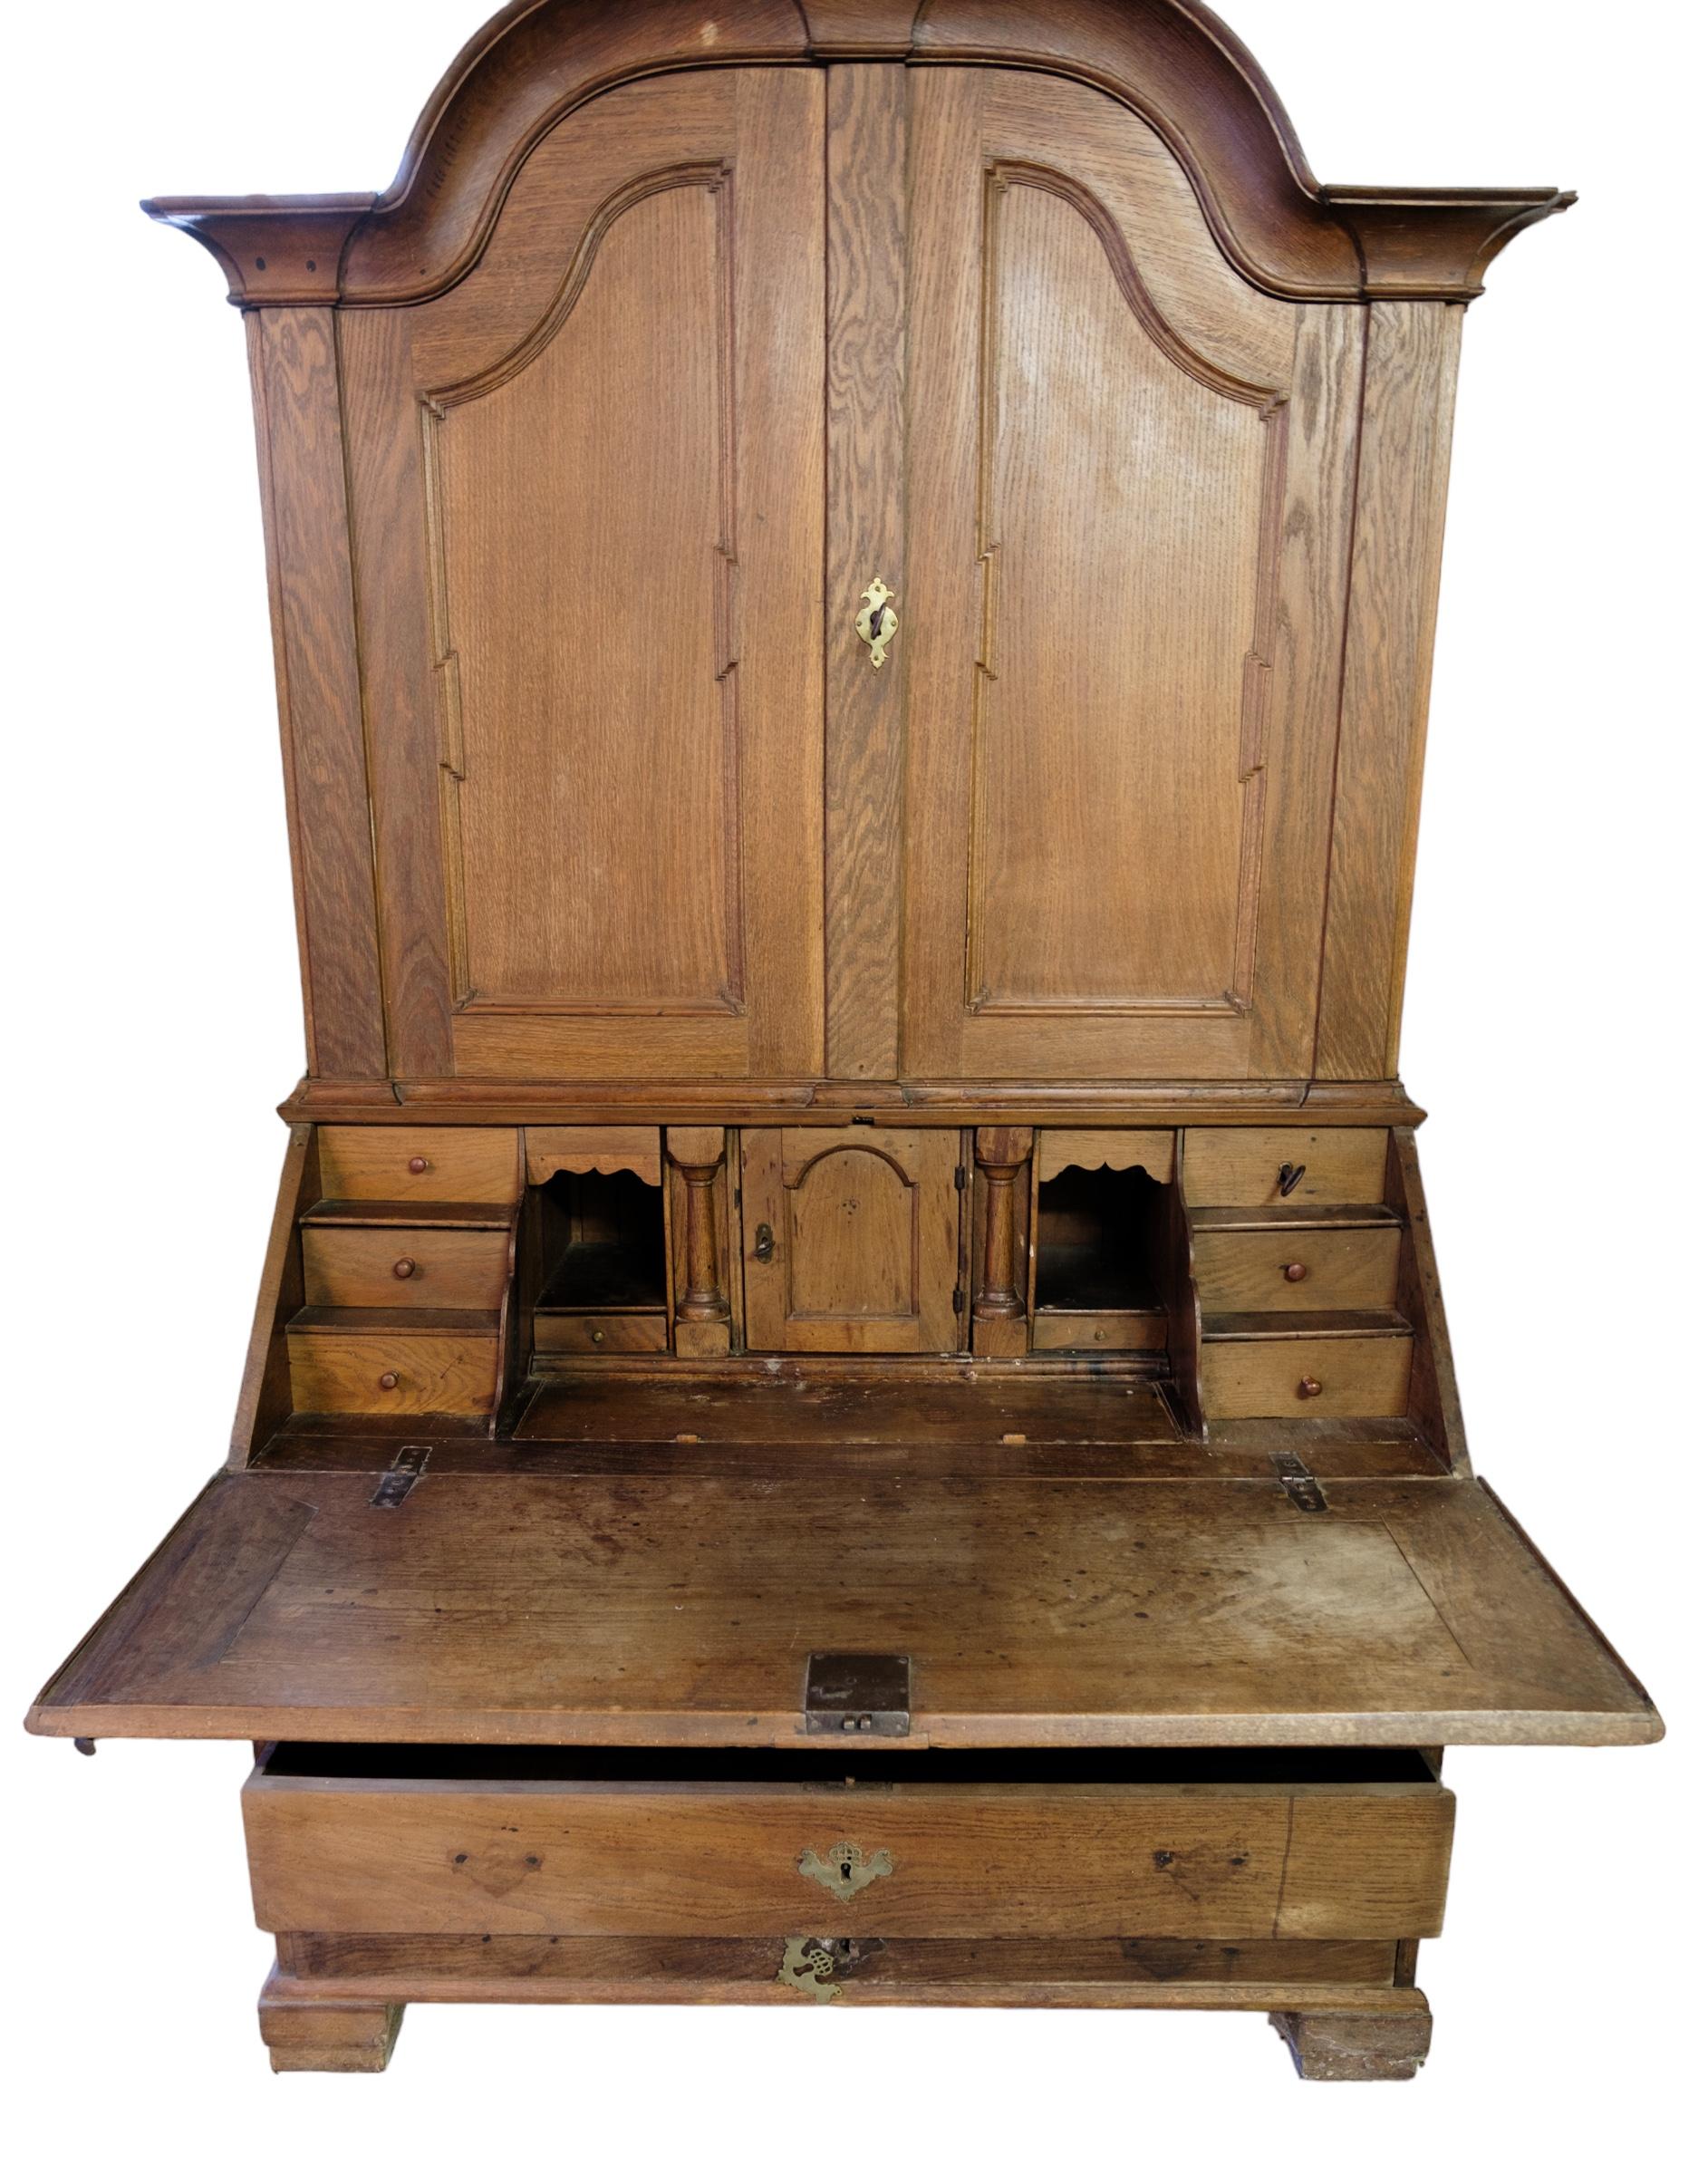 Baroque chatol with drawers made in baroque oak from 1740. A piece of furniture of very high quality
Dimensions in cm: H:210 W:123 D:60